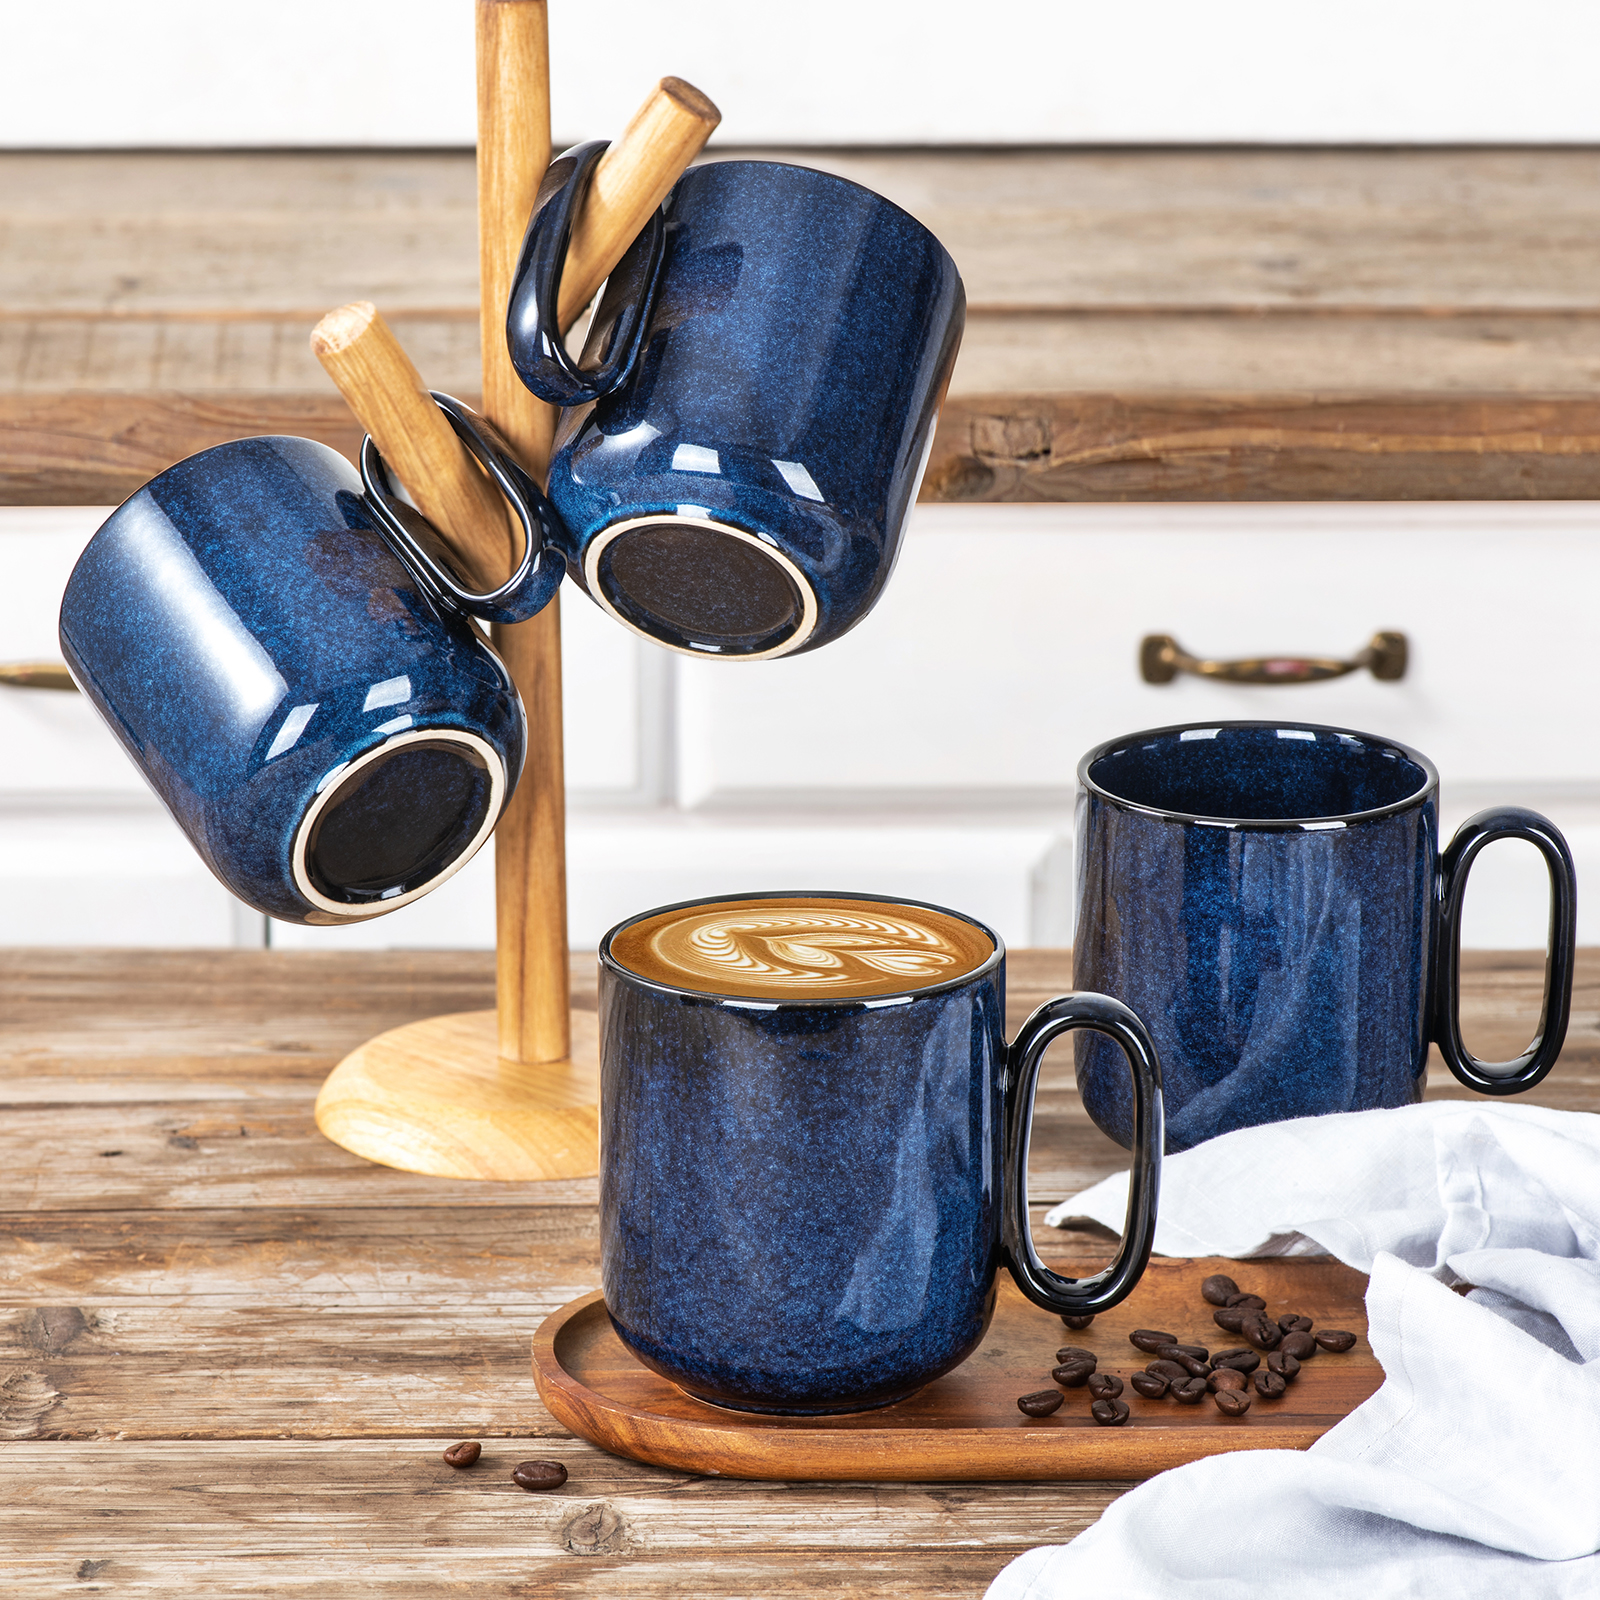 Starry Blue 6.5 oz Cappuccino Cups with Saucers, Set of 4, Ceramic Coffee  Cup for Au Lait, Double shot, Latte, Cafe Mocha, Tea, Starry Blue